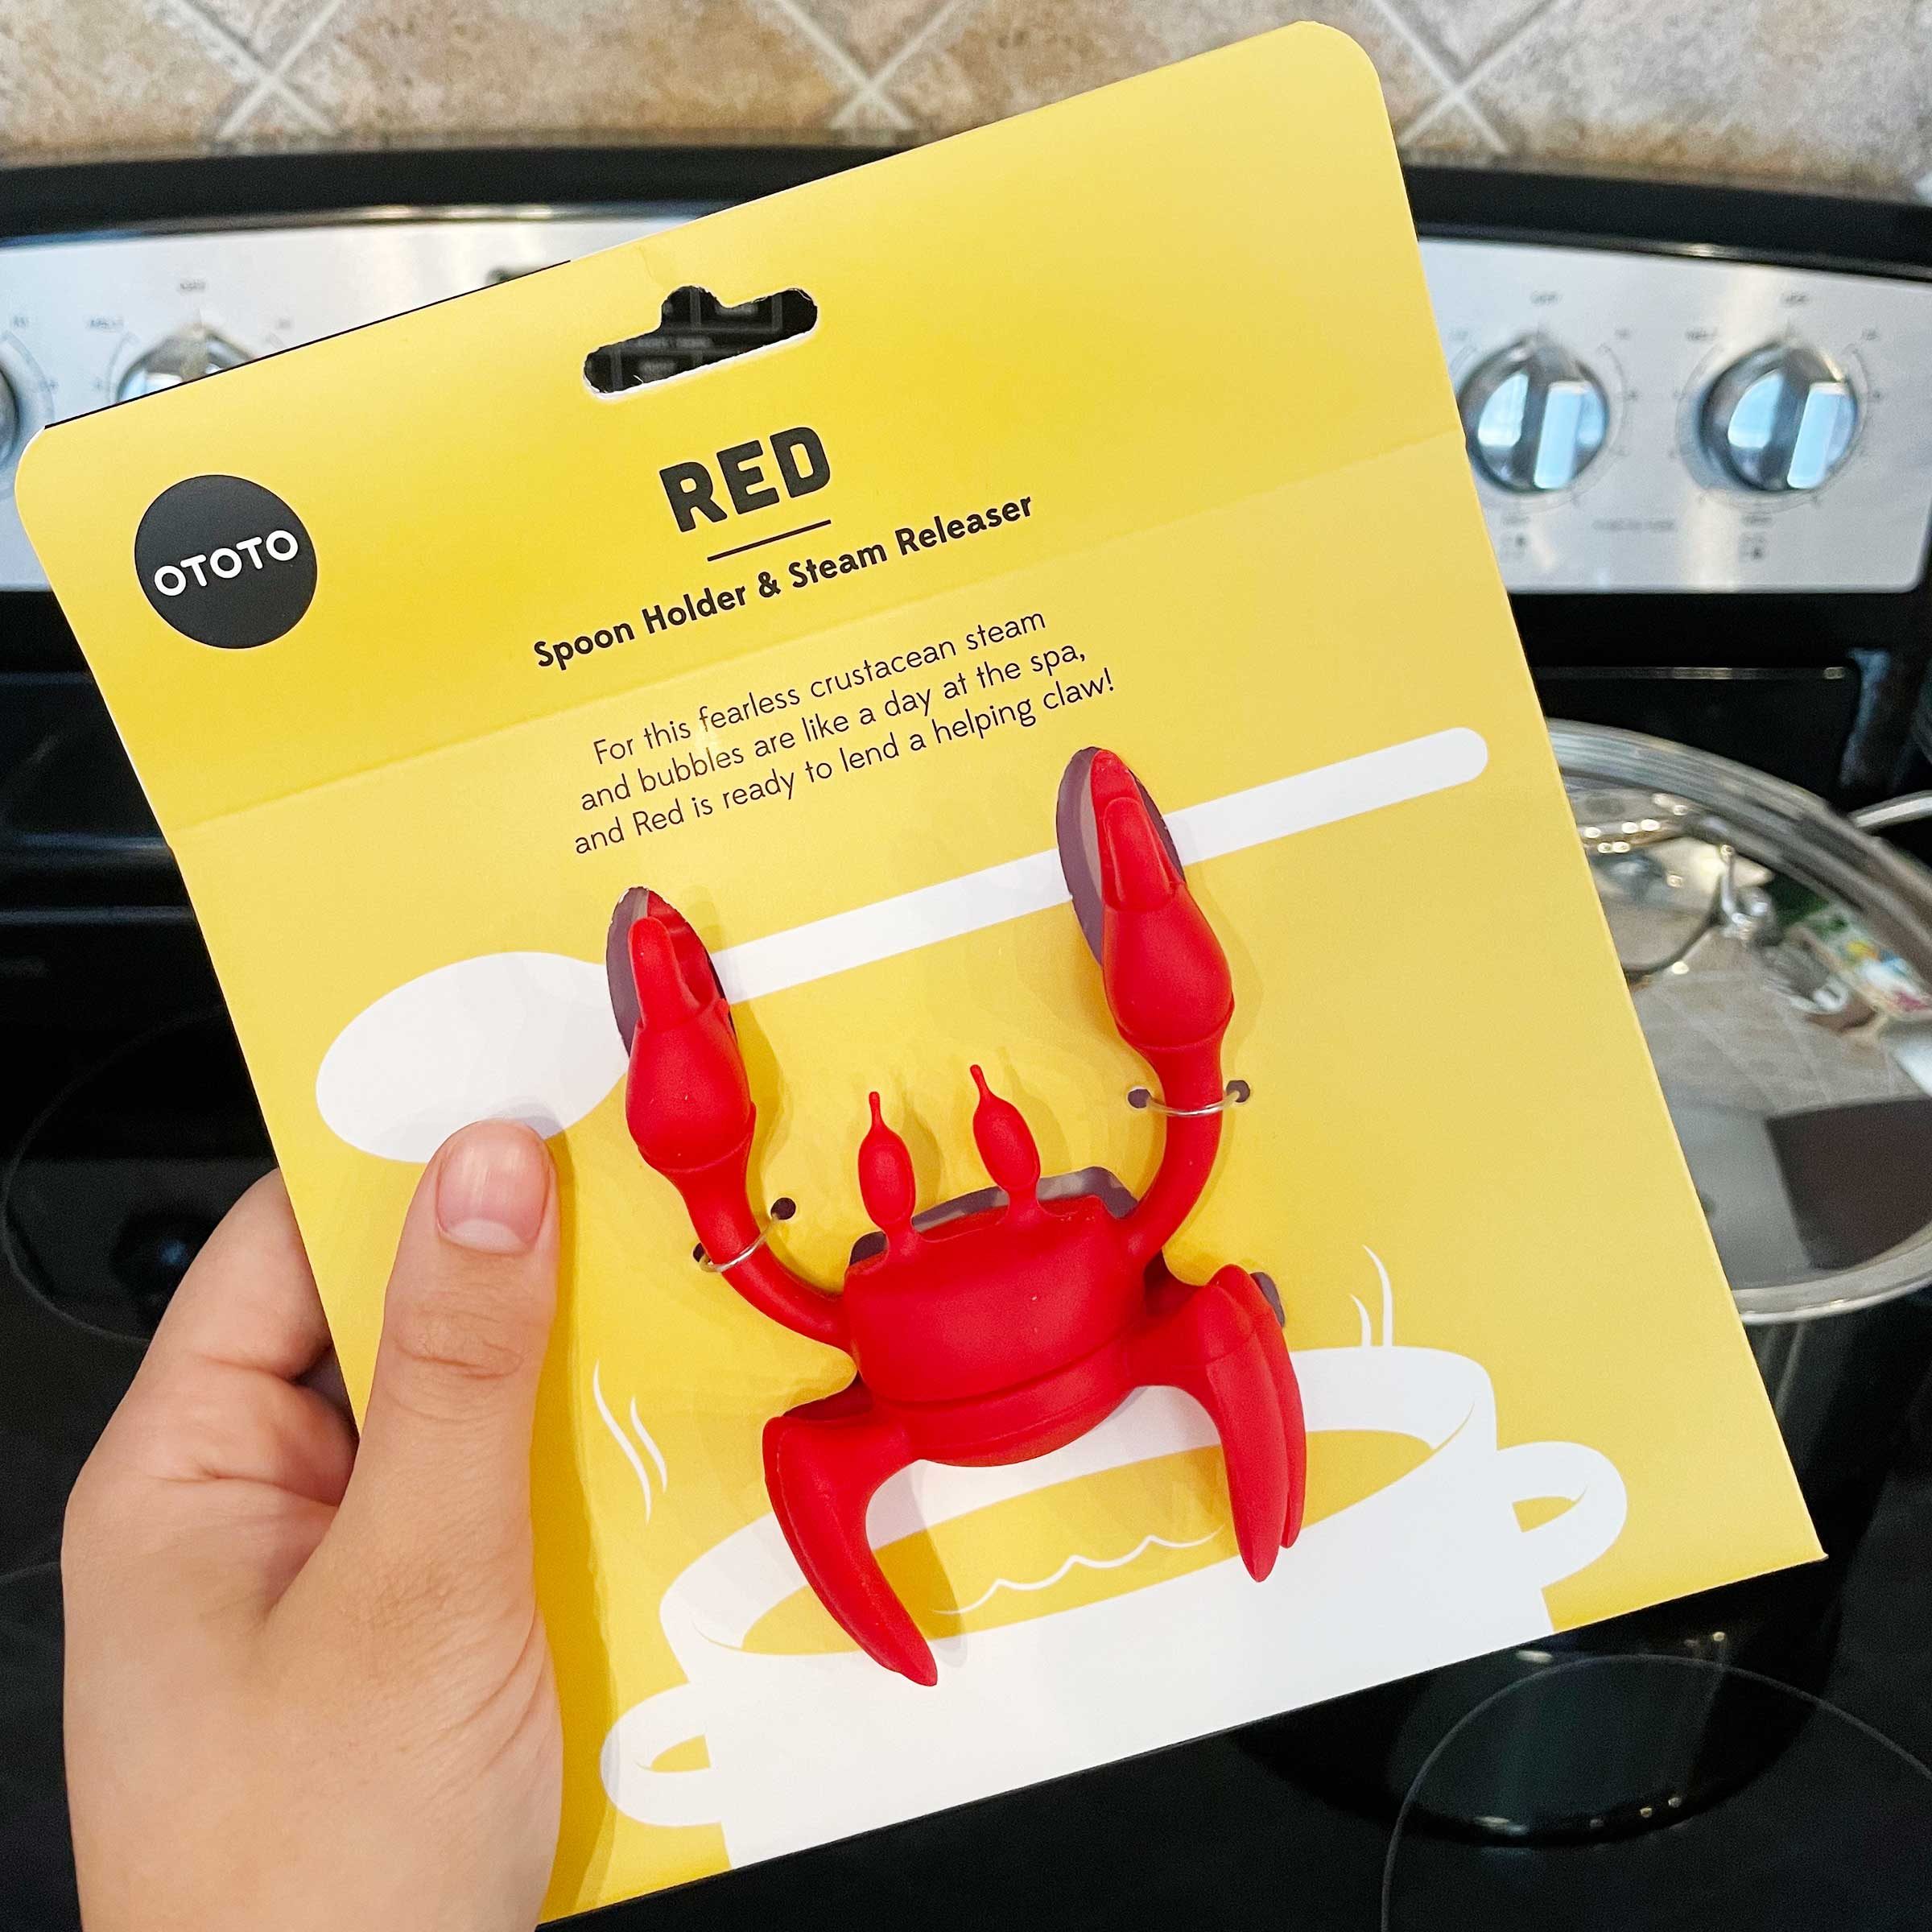 Red the Crab Spoon Holder and Steam Releaser, OTOTO